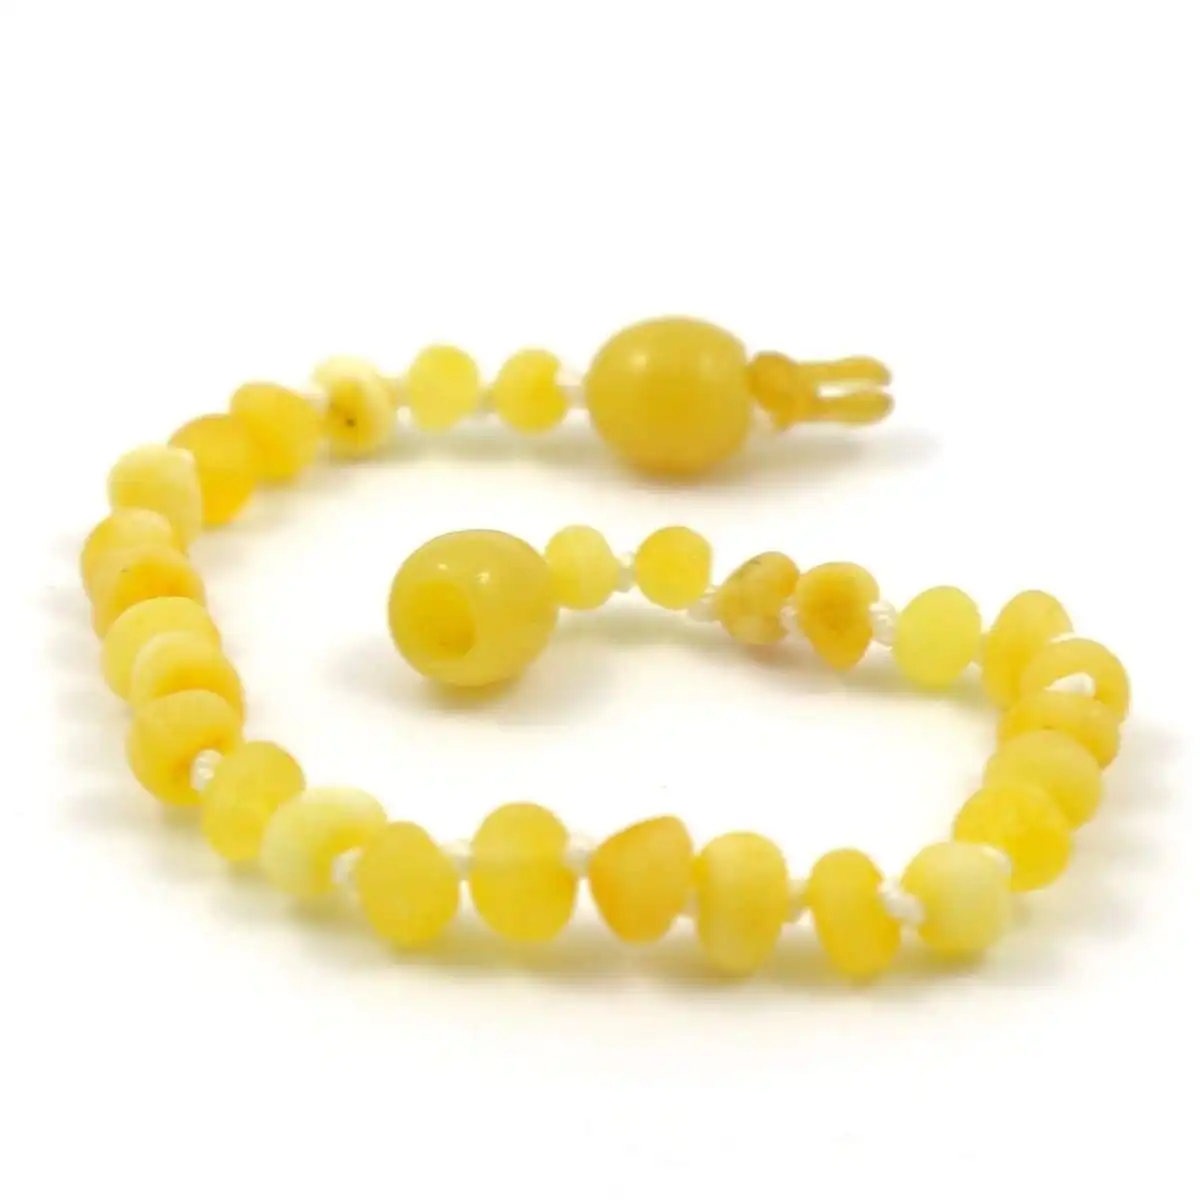 Hot Sale Resin Necklace Beads Necklace For Ladies Jewelry Fashion Jewelry Necklaces